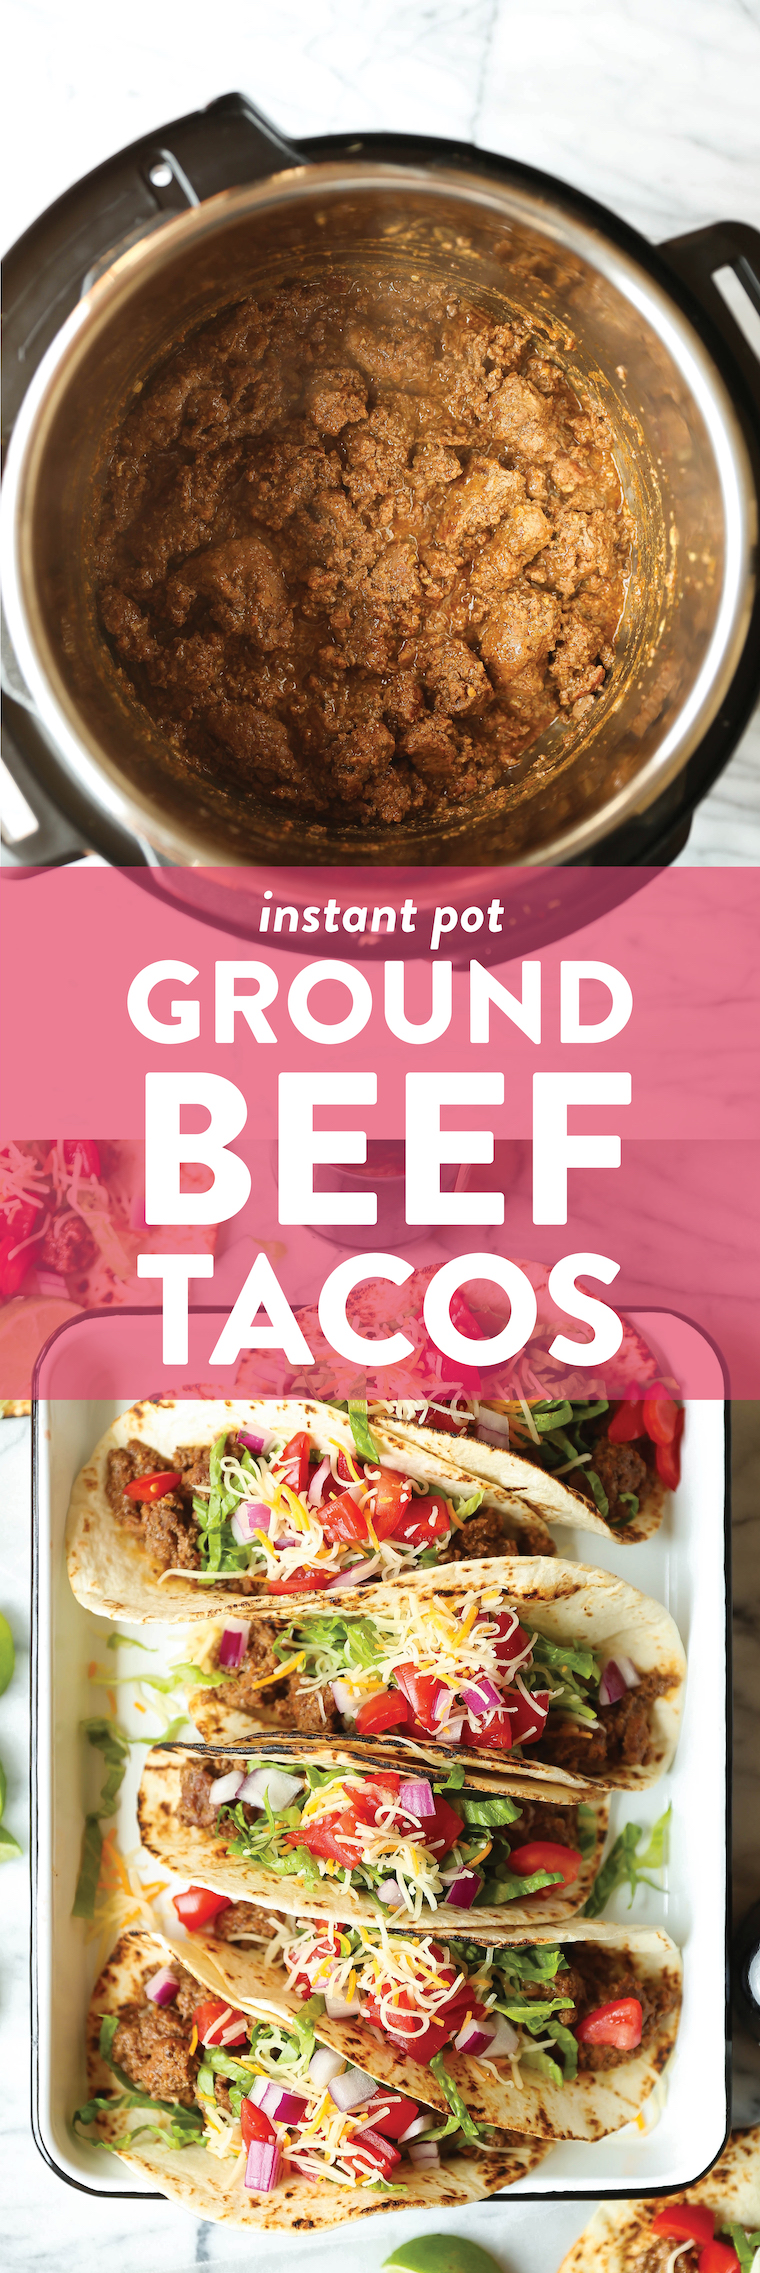 https://s23209.pcdn.co/wp-content/uploads/2020/02/Instant-Pot-Ground-Beef-Tacos.jpg